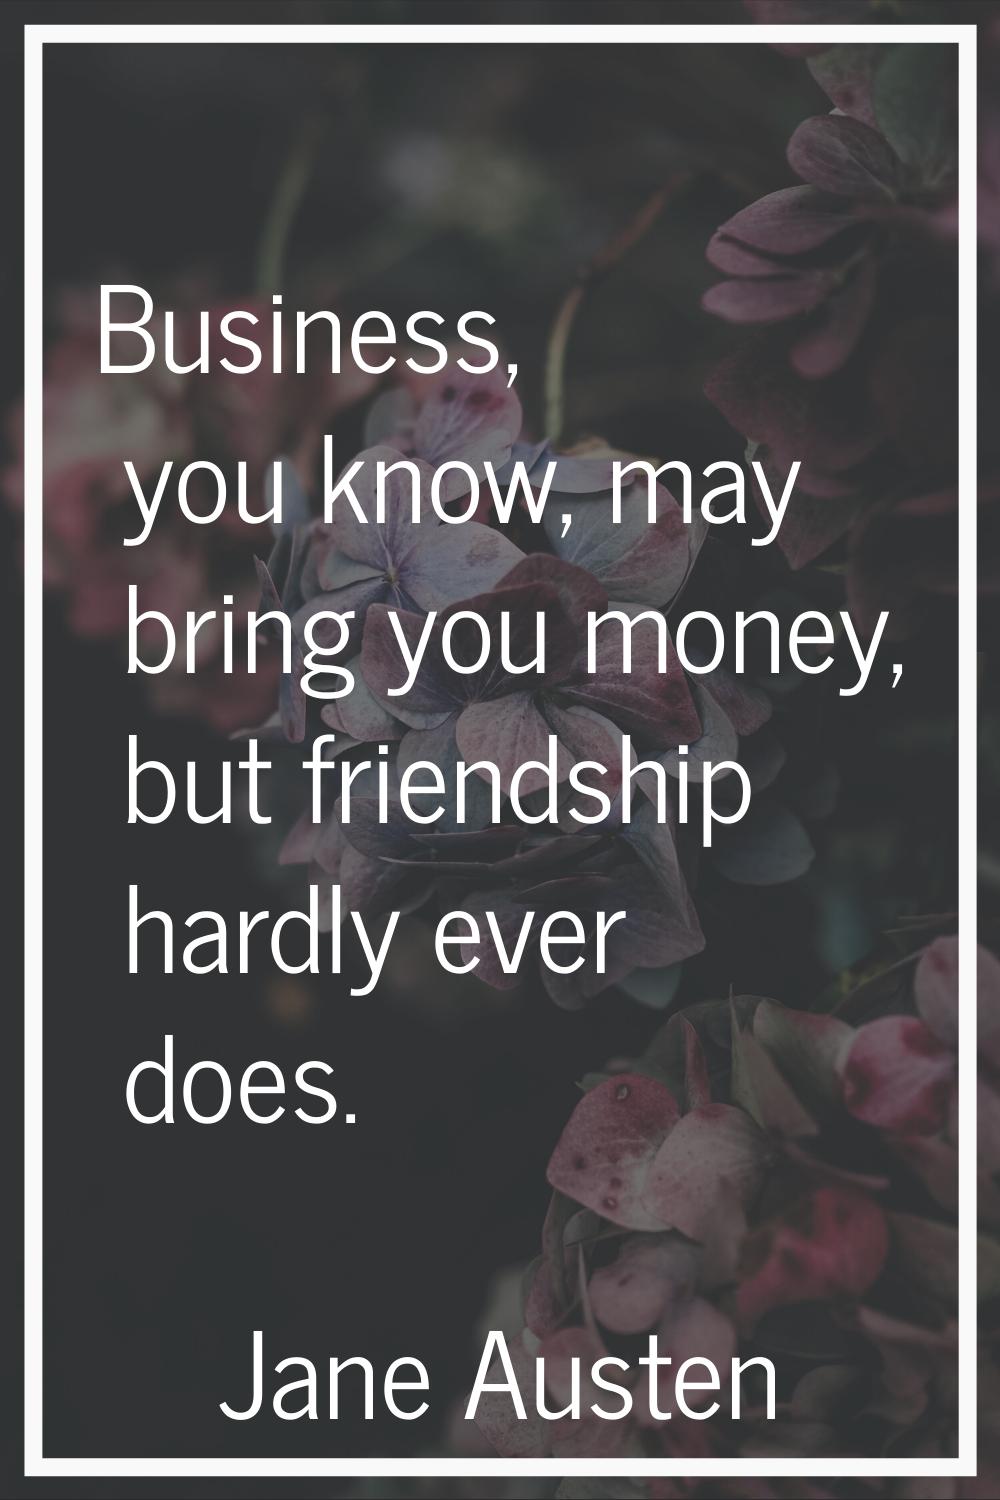 Business, you know, may bring you money, but friendship hardly ever does.